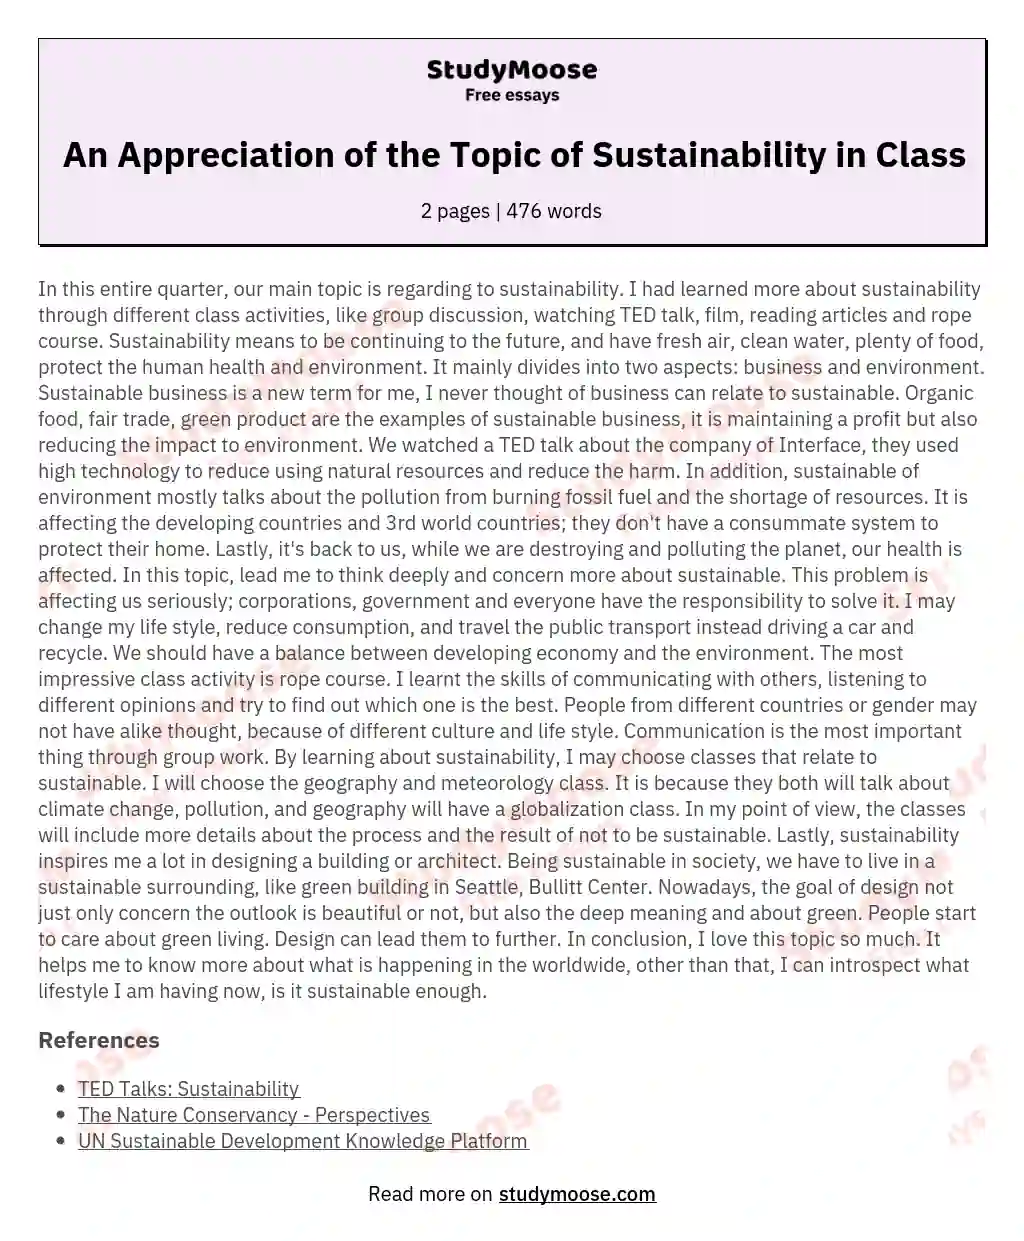 An Appreciation of the Topic of Sustainability in Class essay